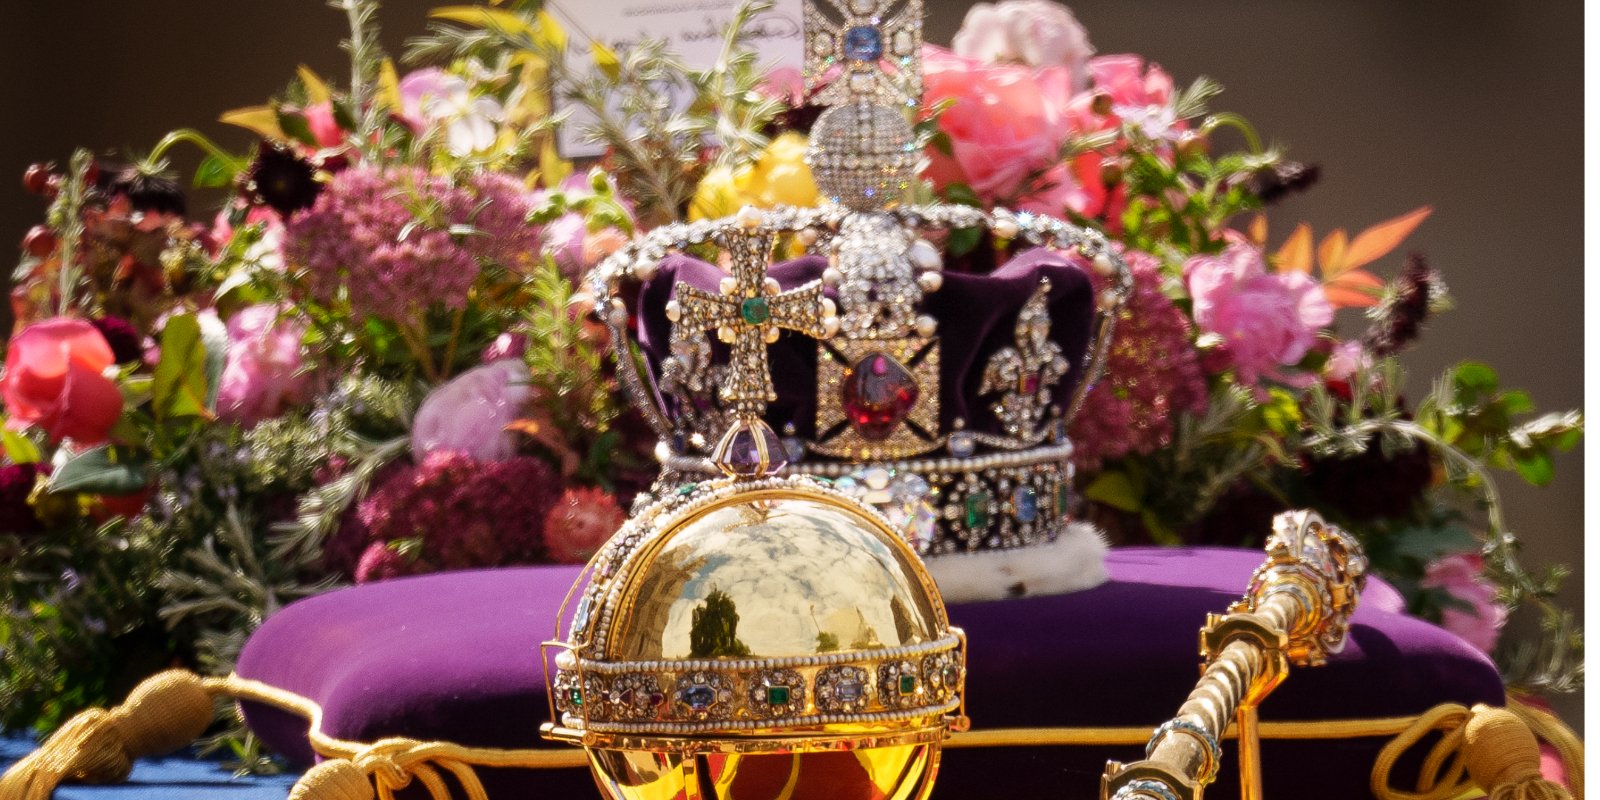 The Crown Jewels on display during the funeral of Queen Elizabeth II.